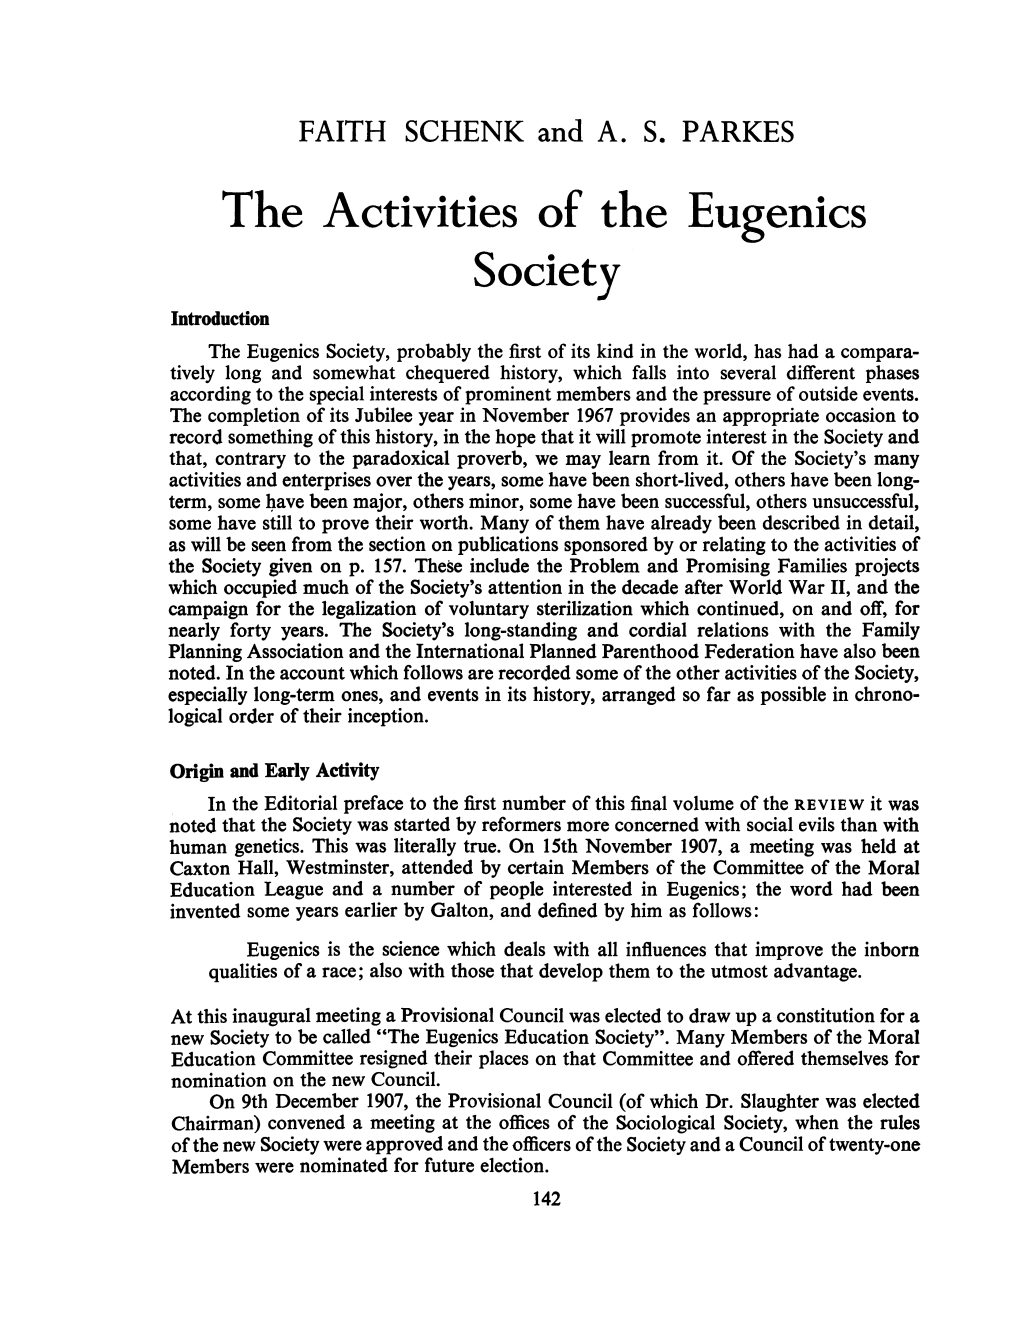 Activities of the Eugenics Society